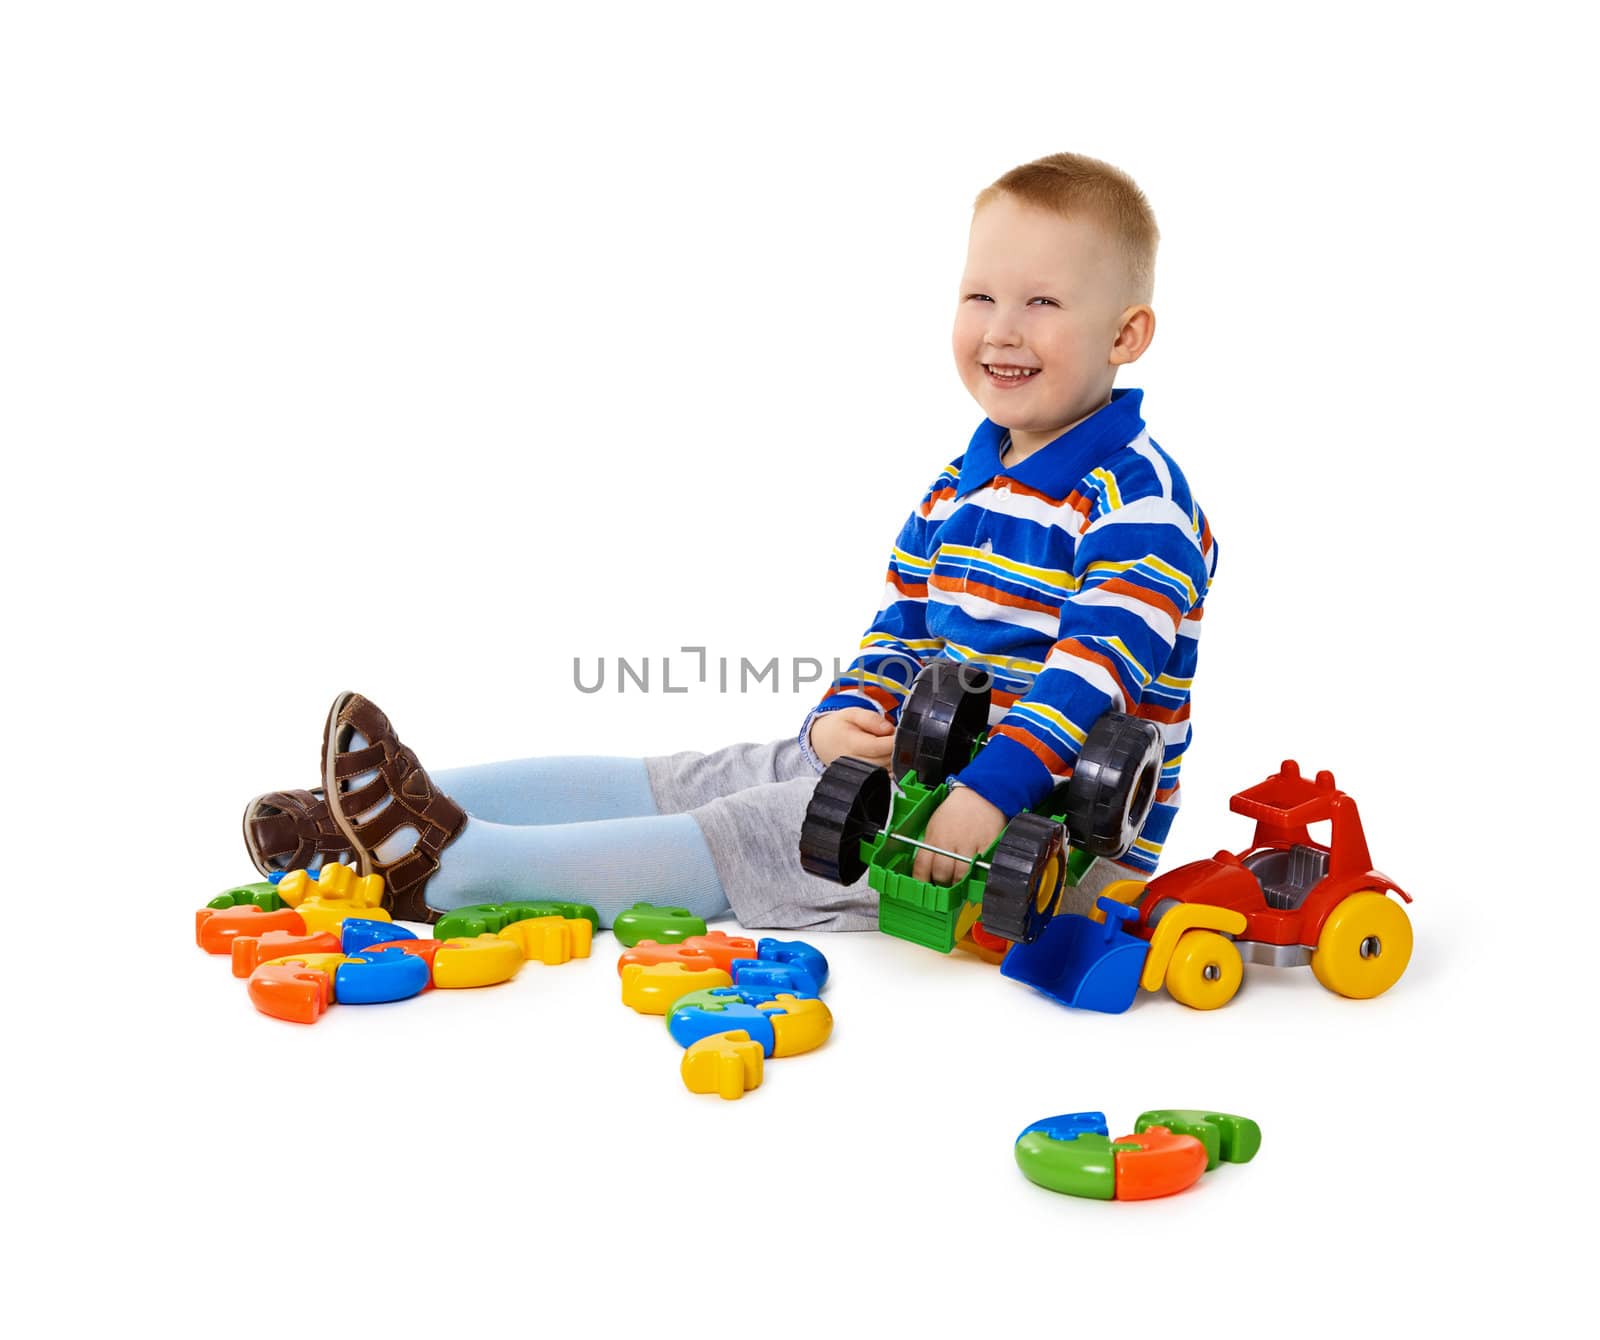 Little boy sitting among toys on floor by pzaxe